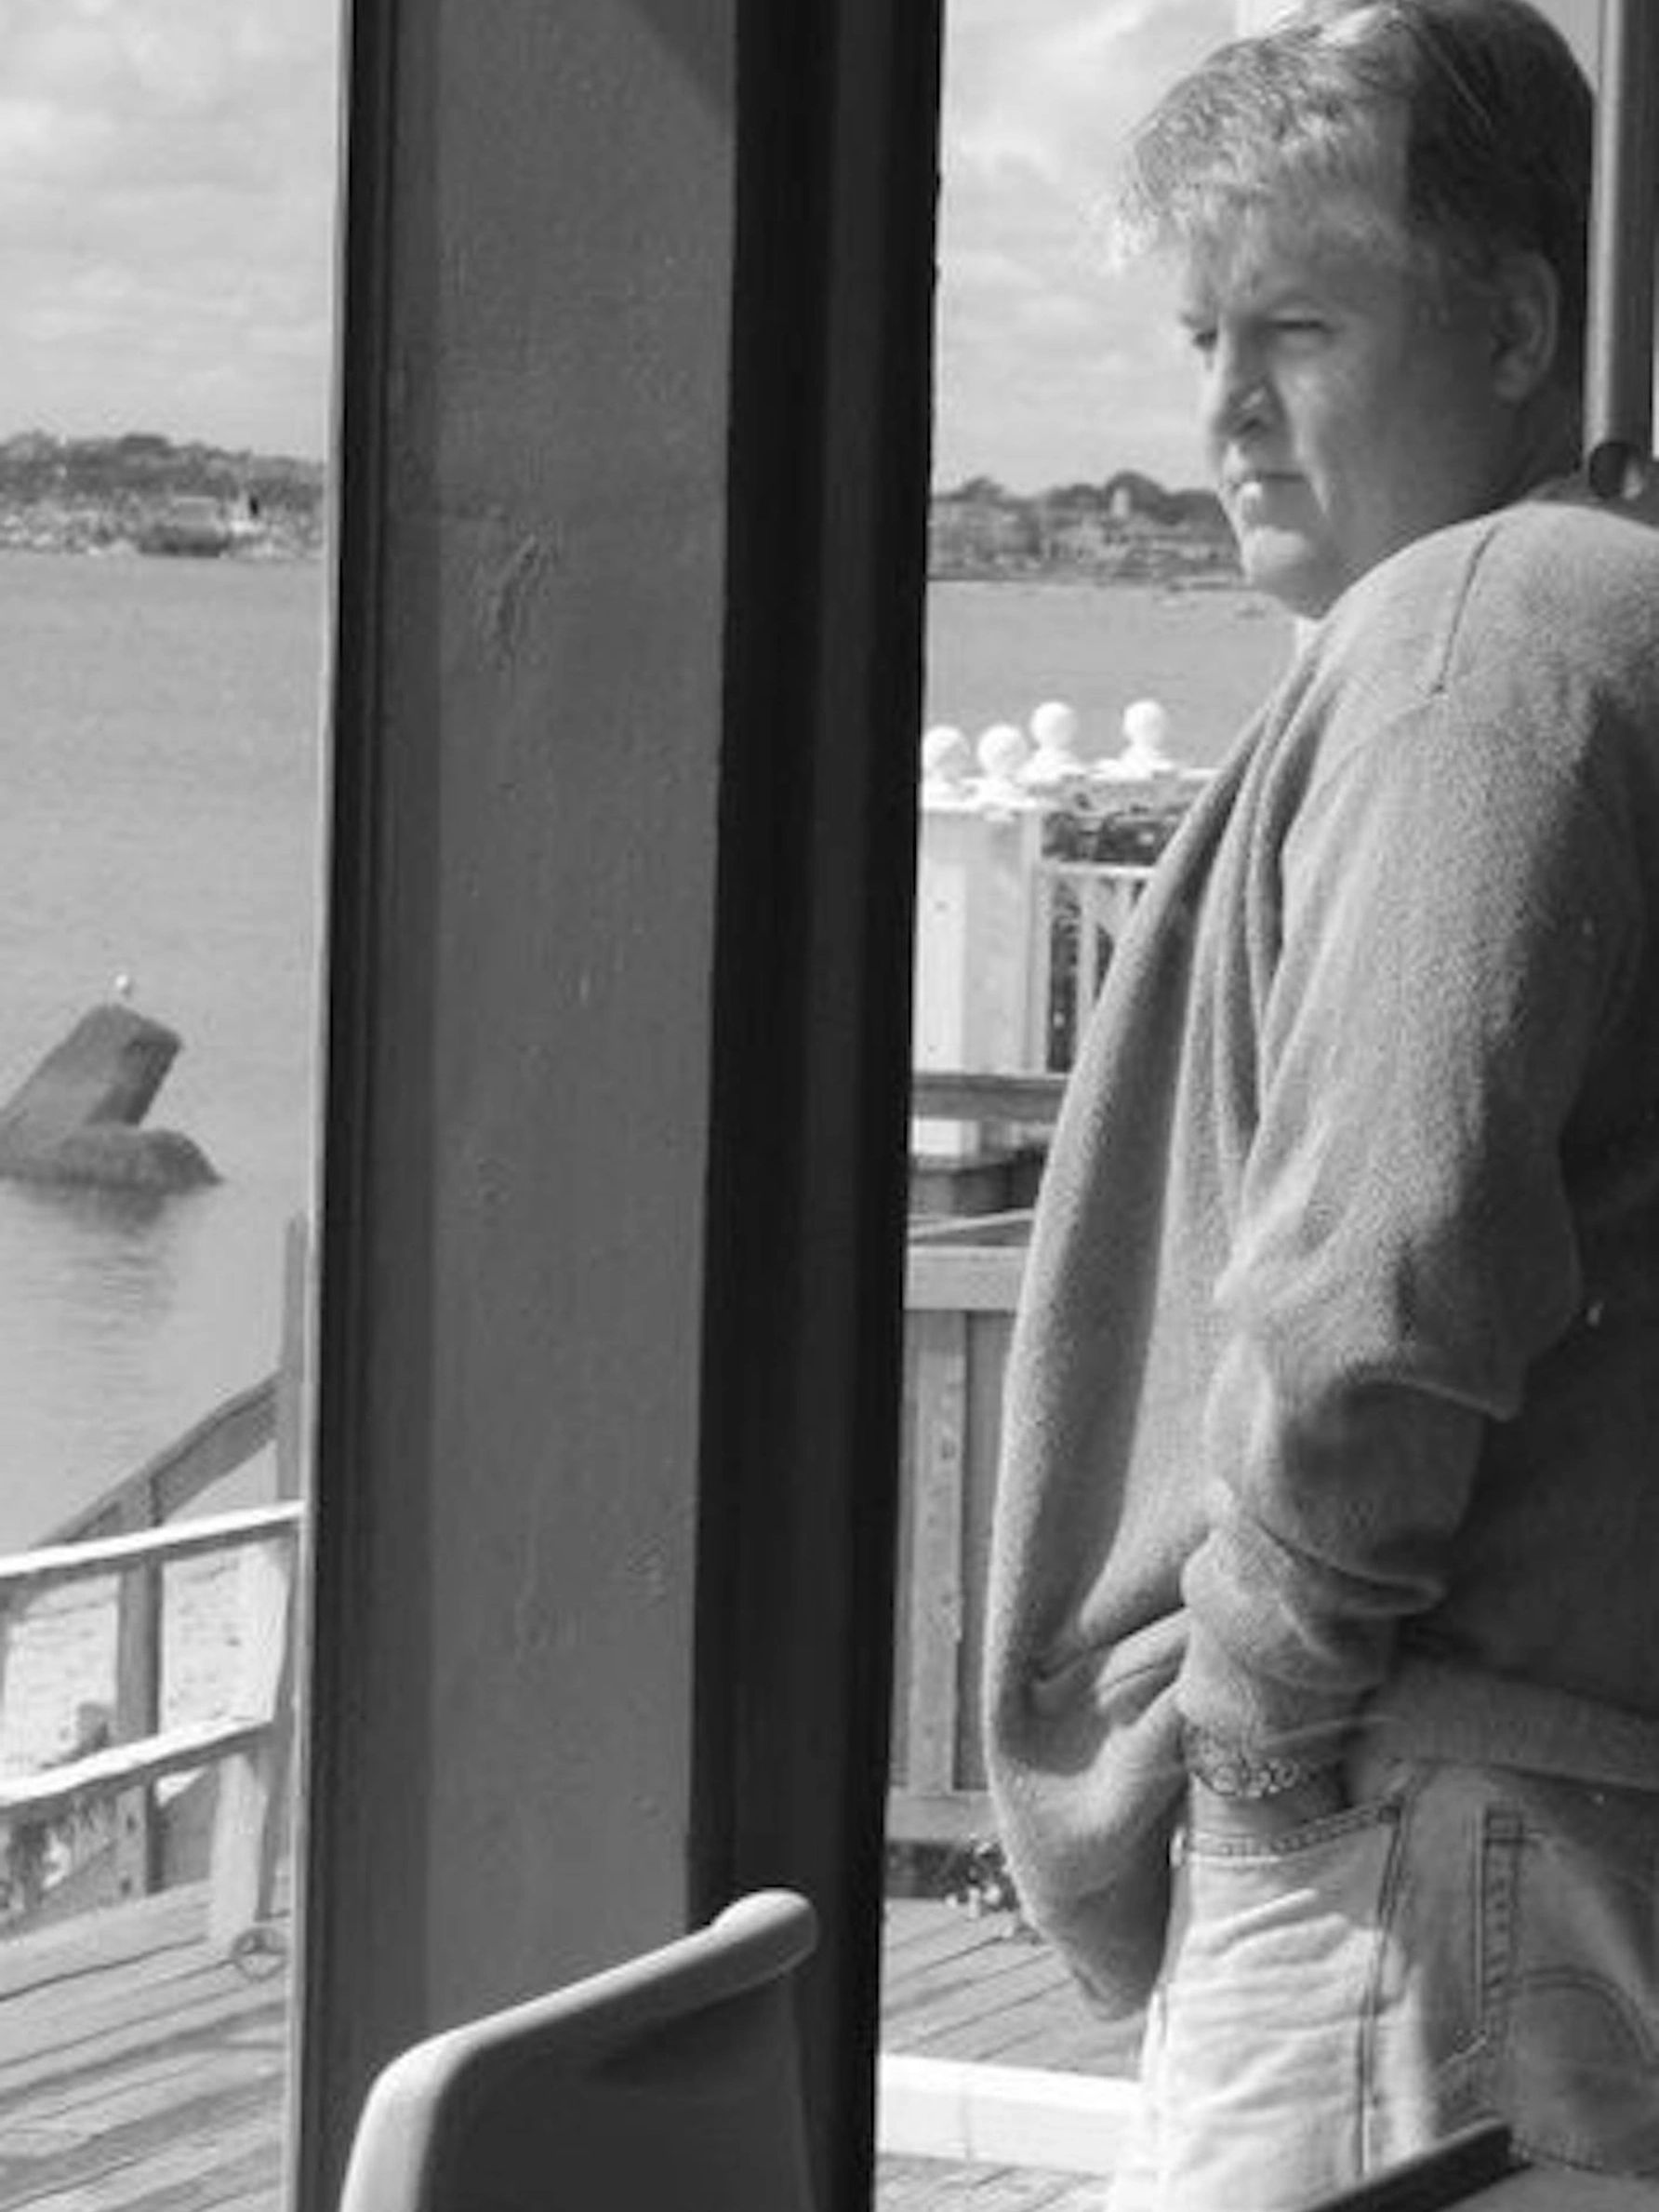 Kevin St. Jarre in Provincetown, Massachusetts, at Norman Mailer's former residence.